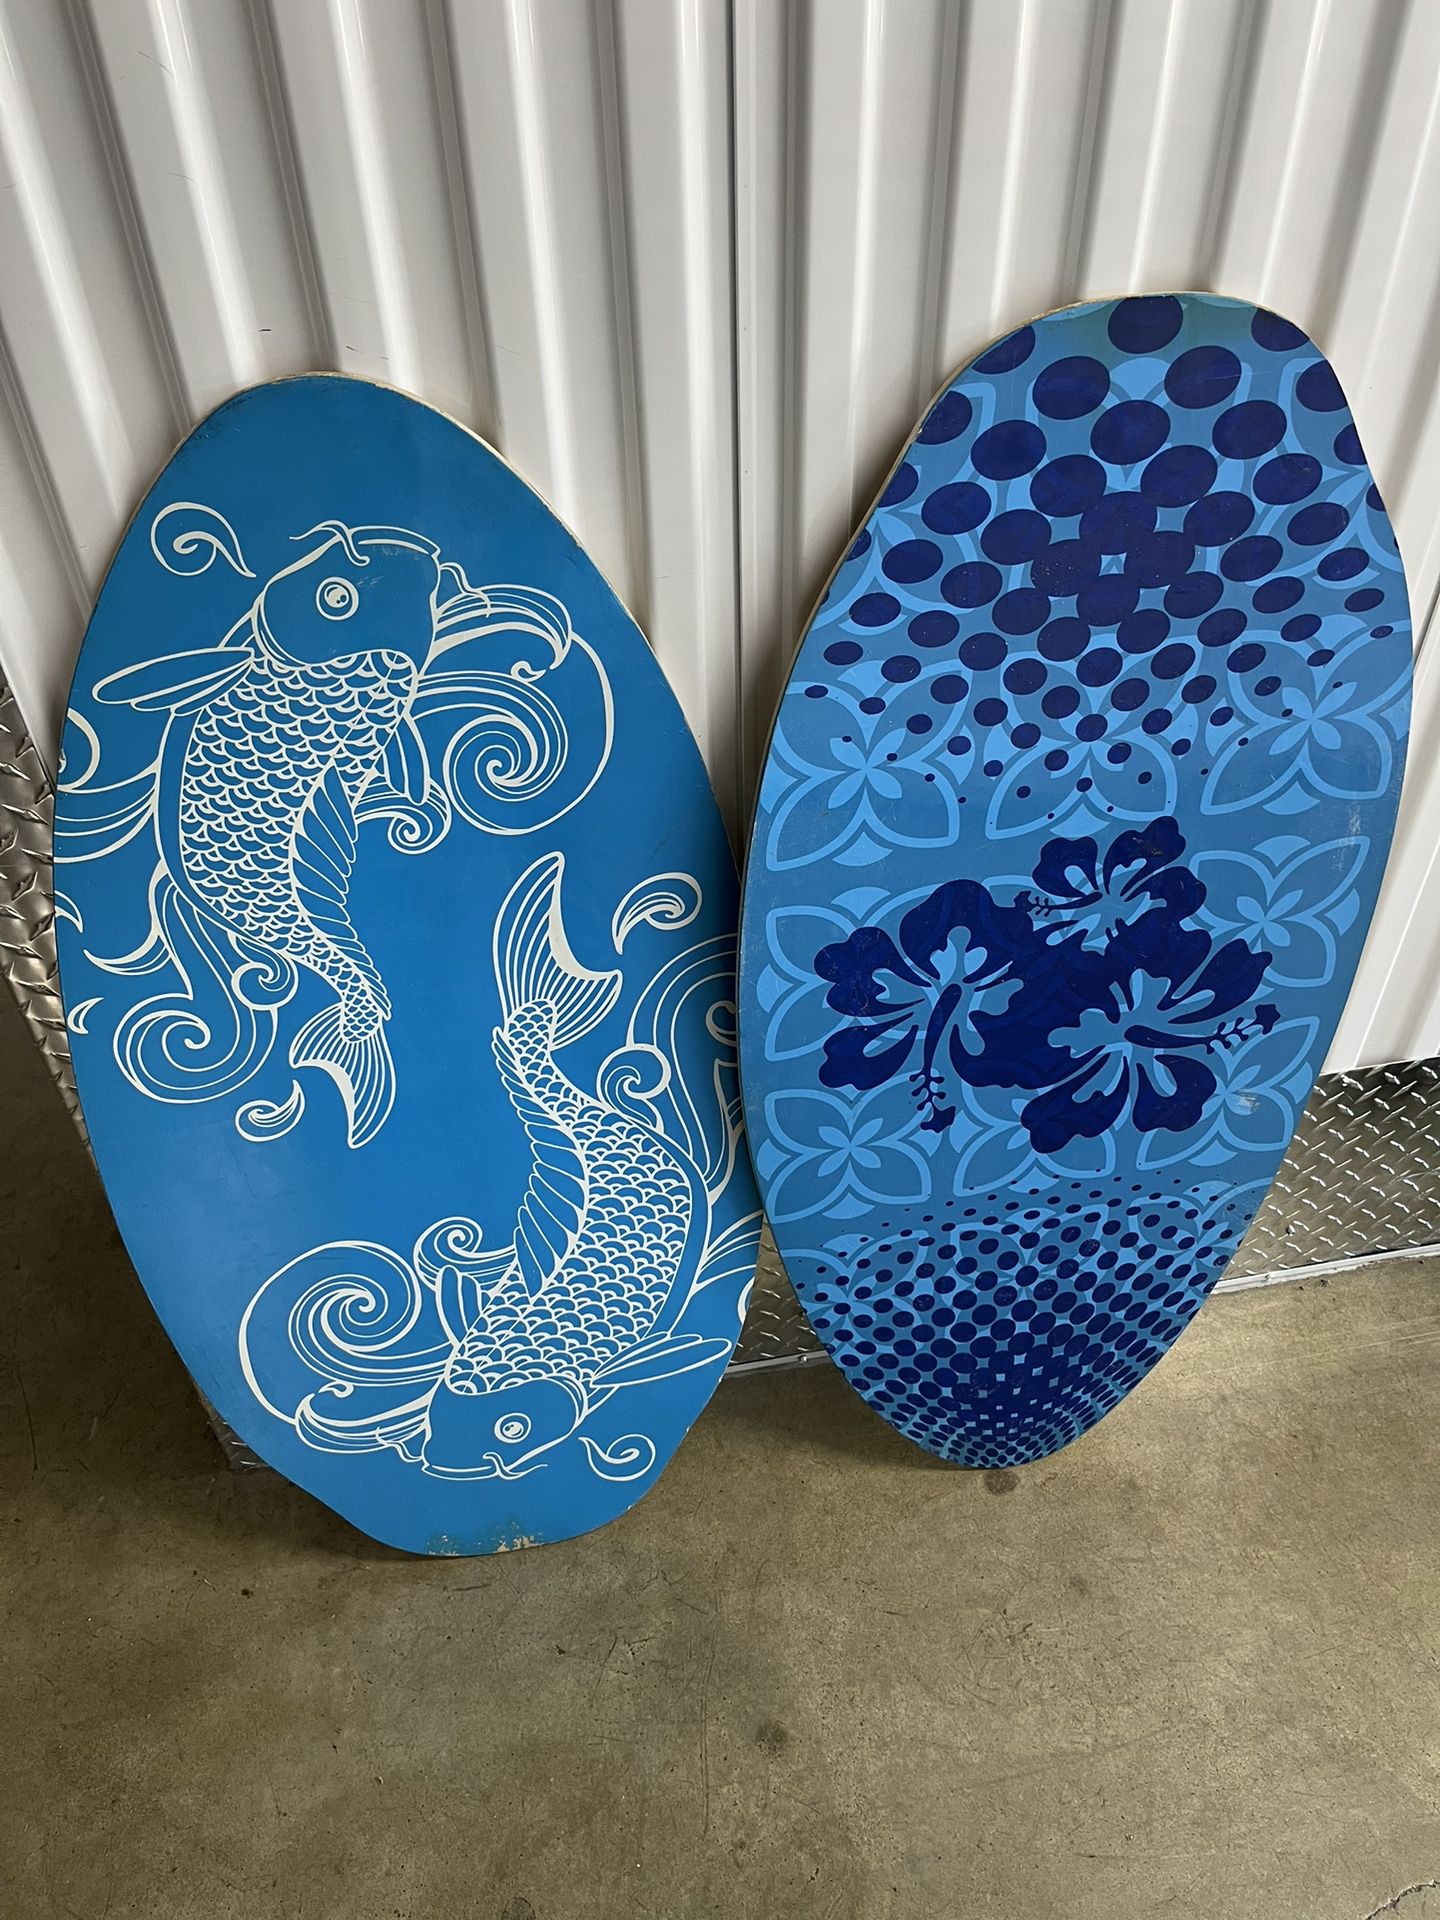 Surf Boards